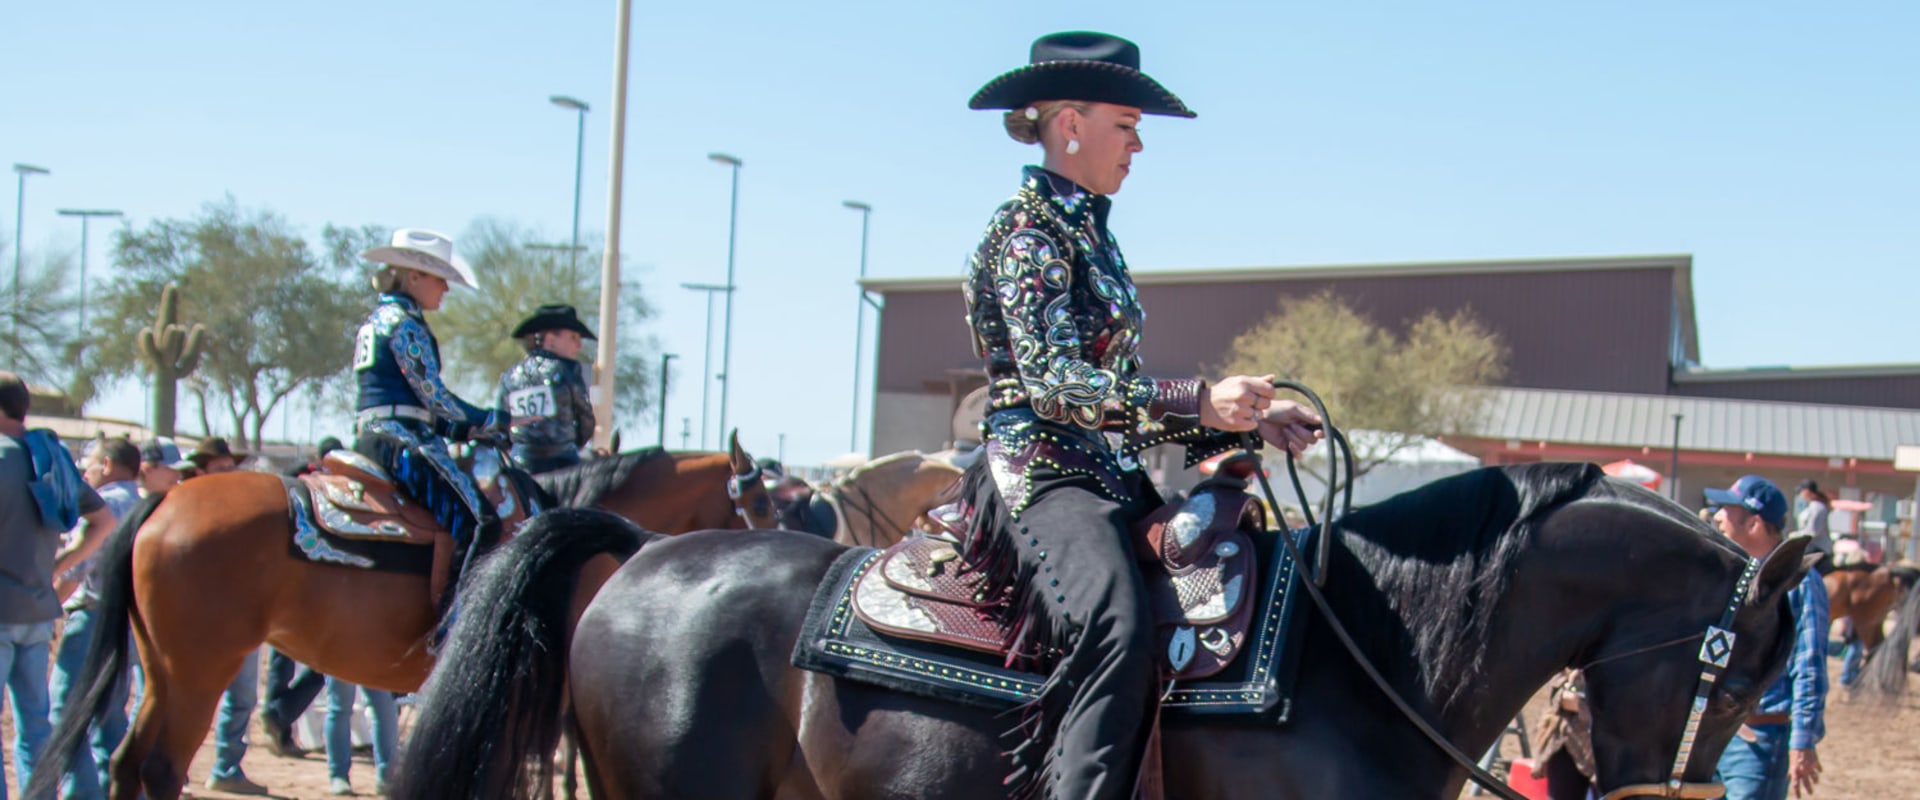 Experience the Best Horse Shows in Scottsdale, Arizona